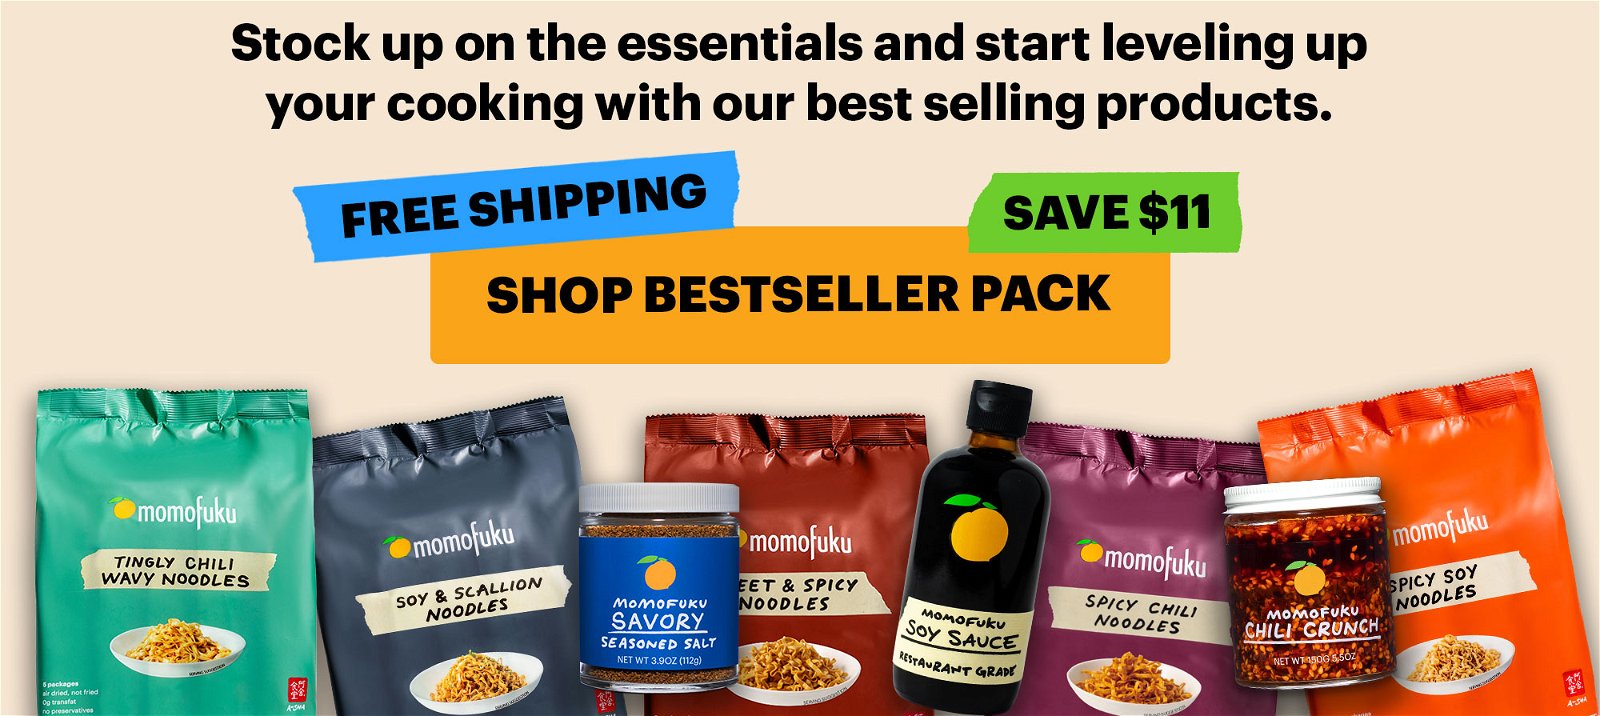 Stock up on the essentials and start leveling up your cooking with our best selling products. FREE SHIPPING, SAVE \\$11, SHOP BESTSELLER PACK